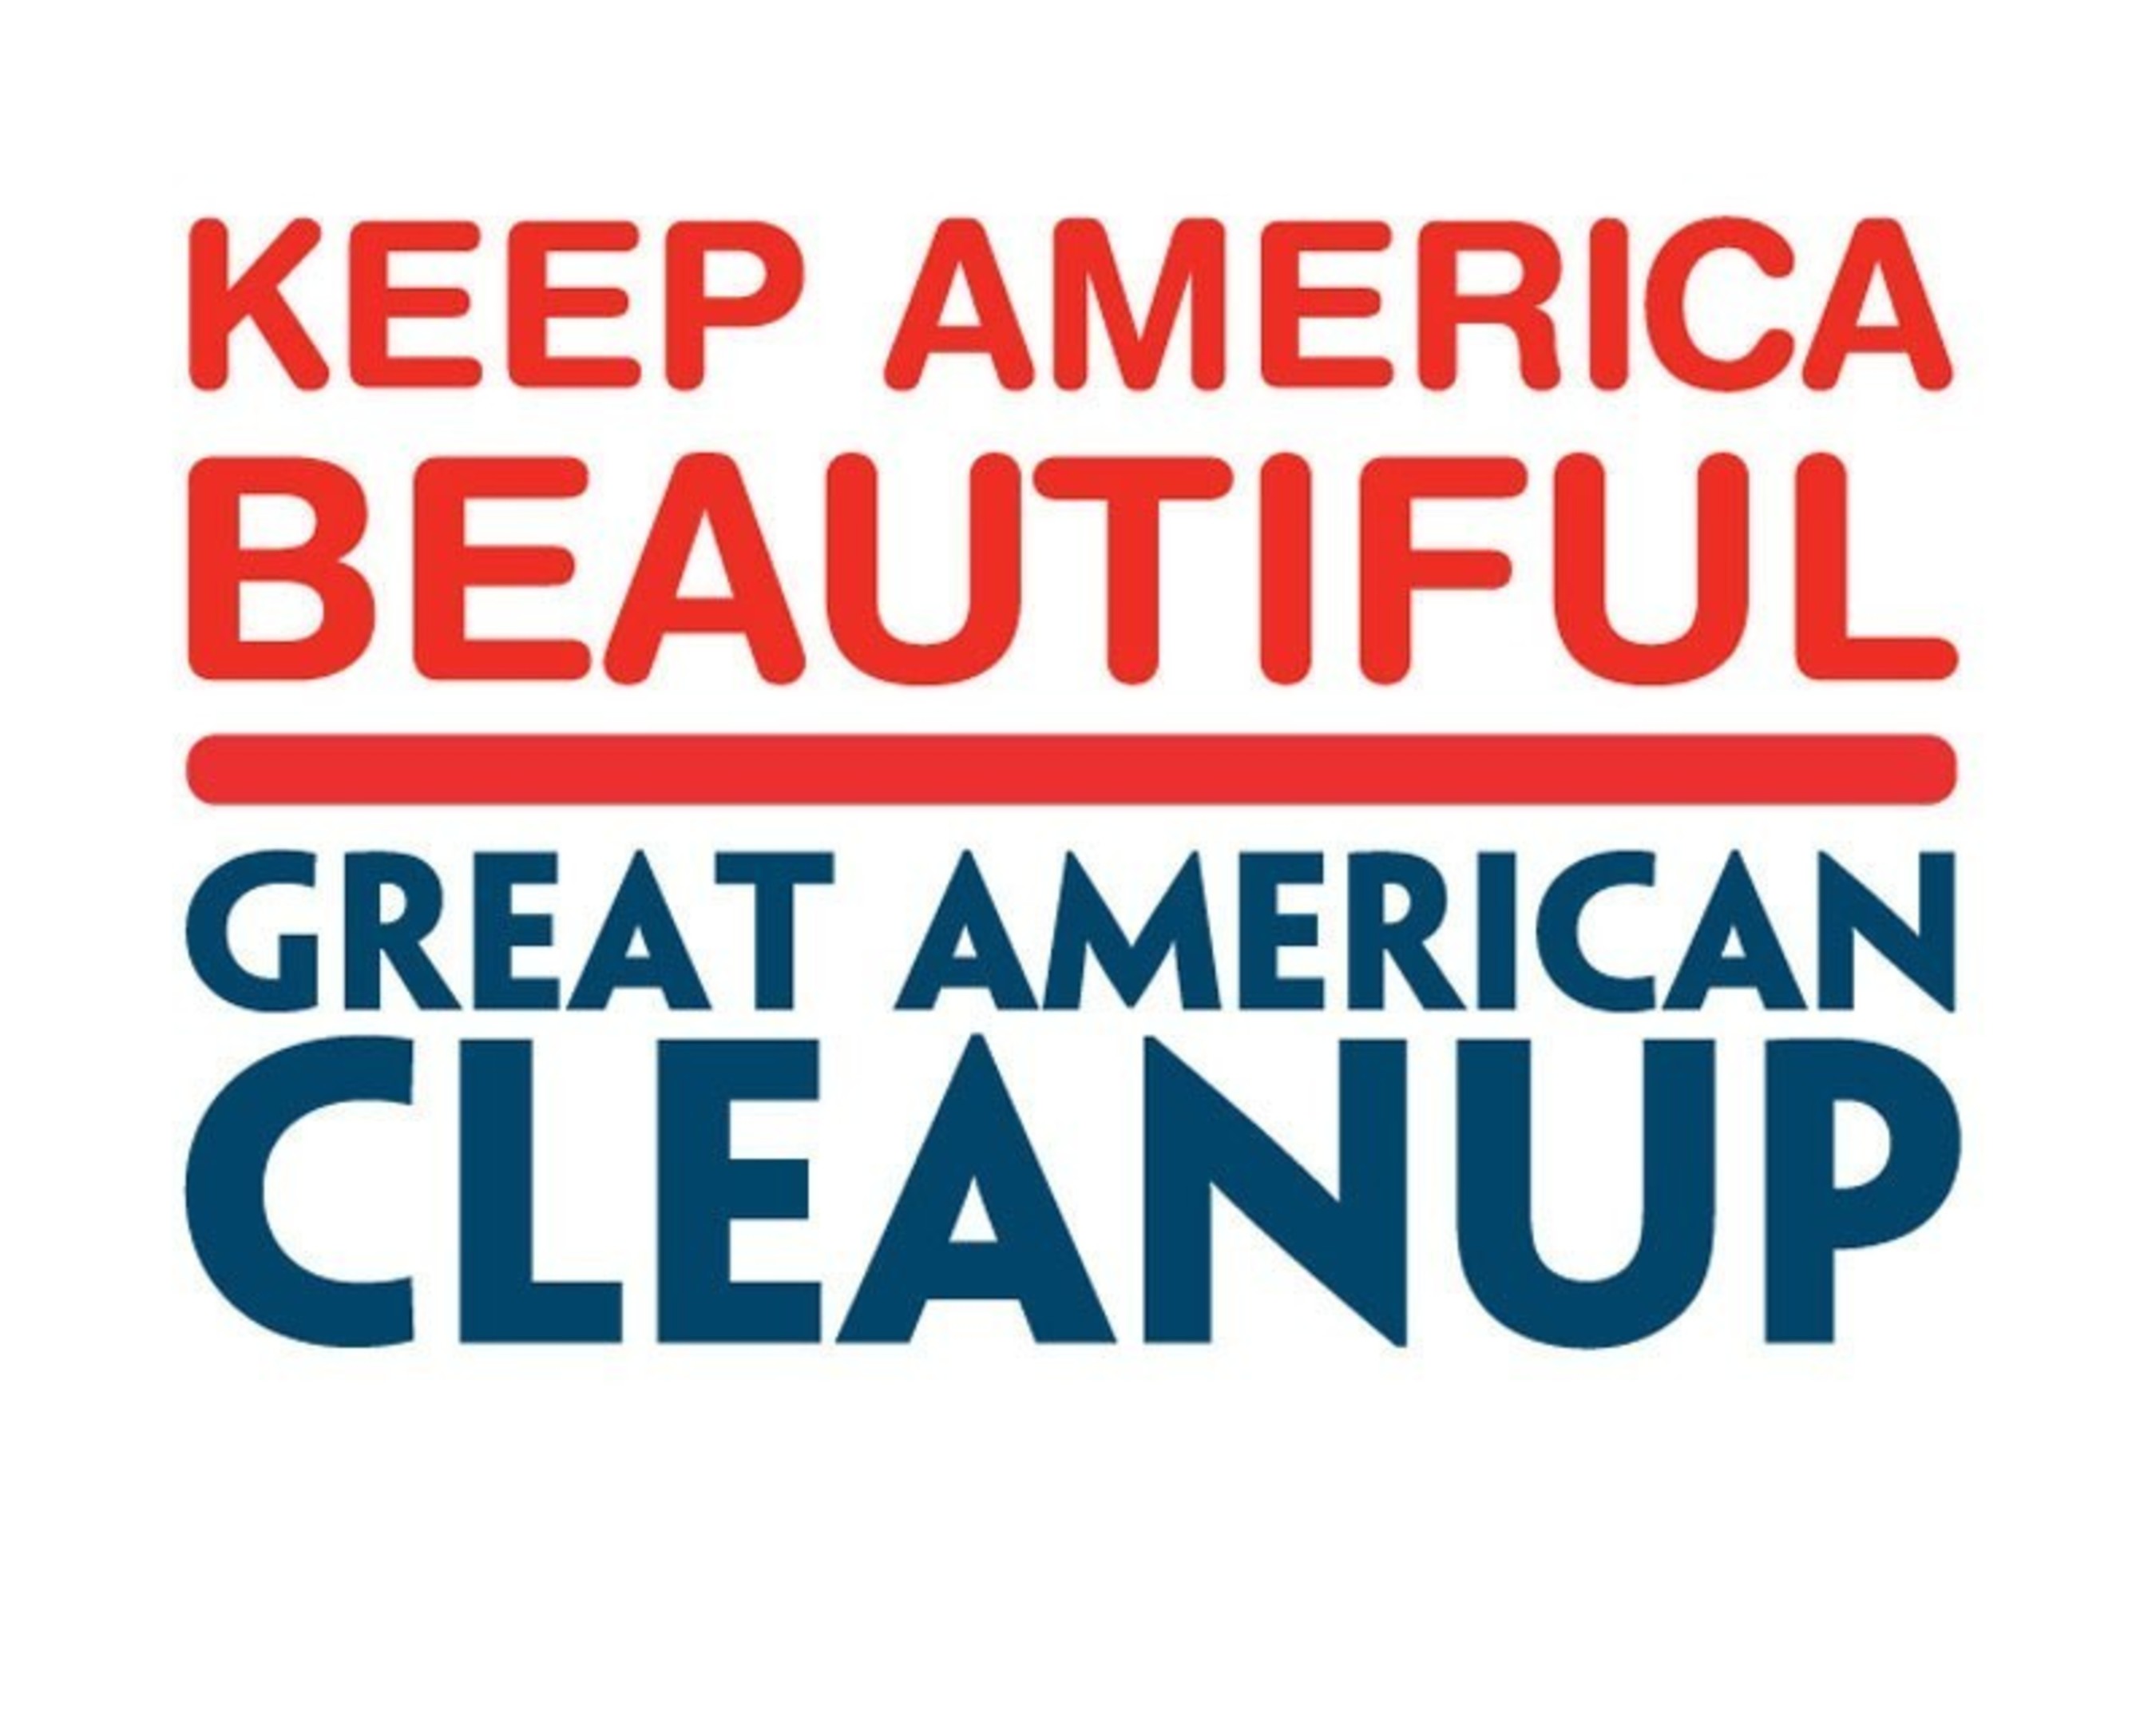 Keep America Beautiful's Great American Cleanup.